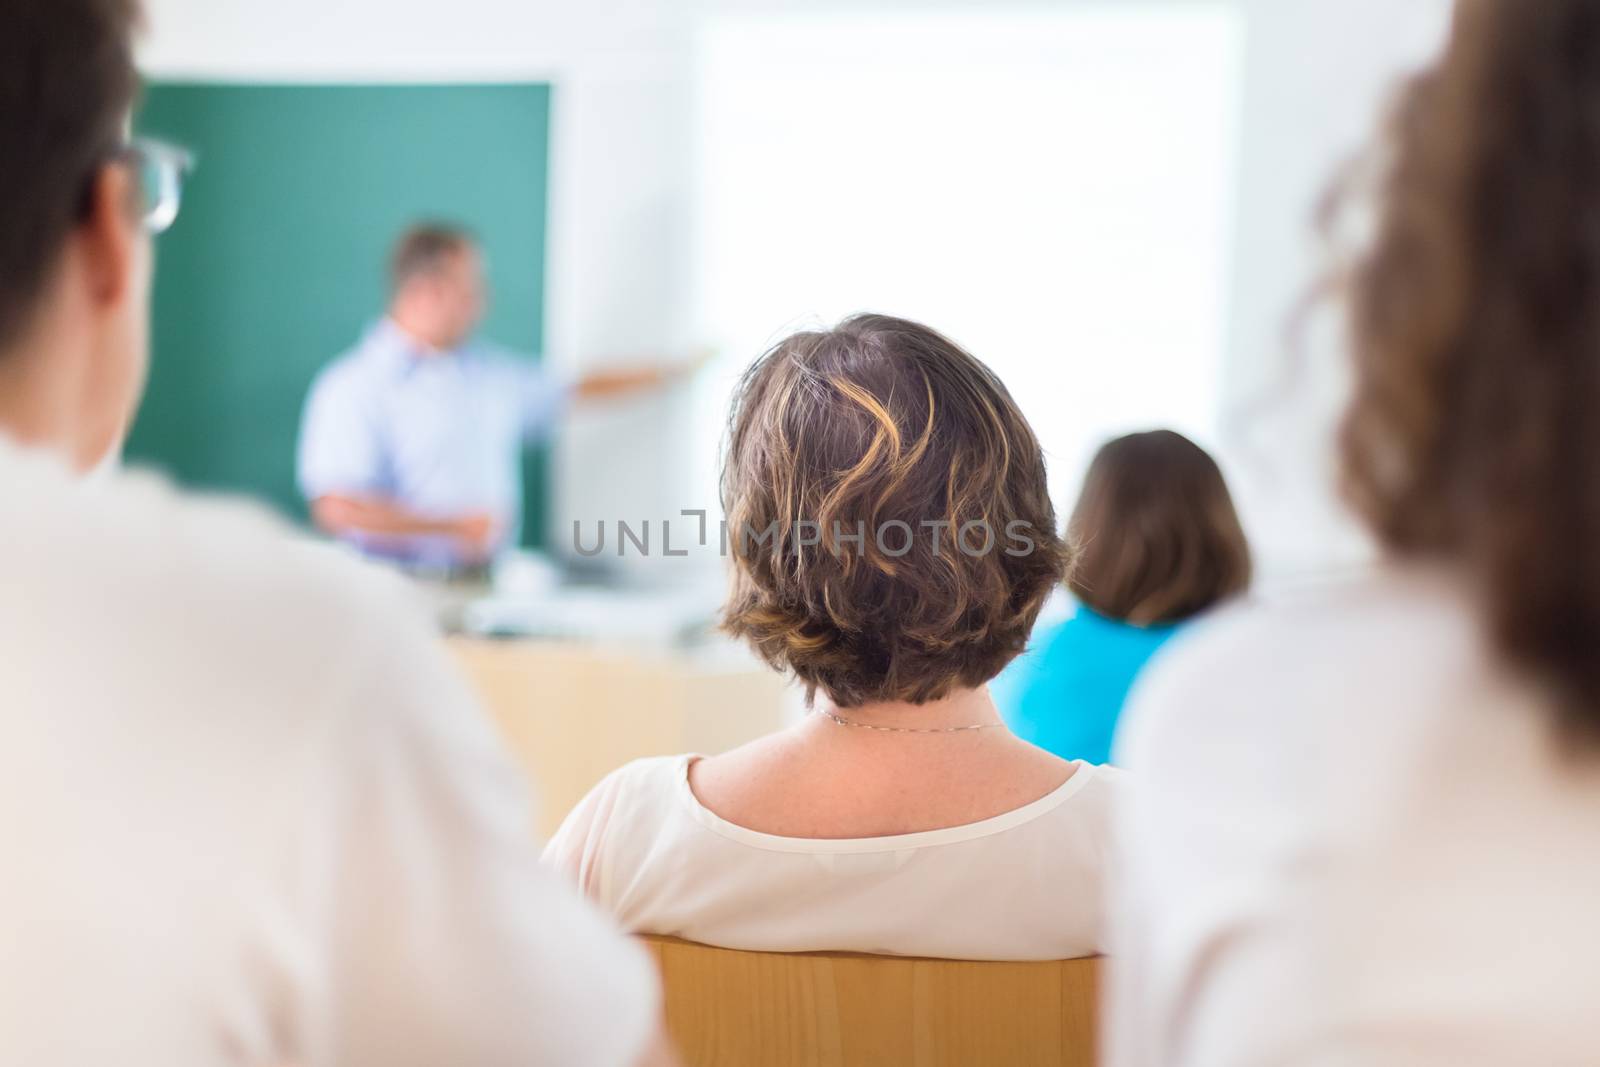 Teacher at university in front of a whiteboard screen. Students listening to lecture and making notes. Focus on the student.